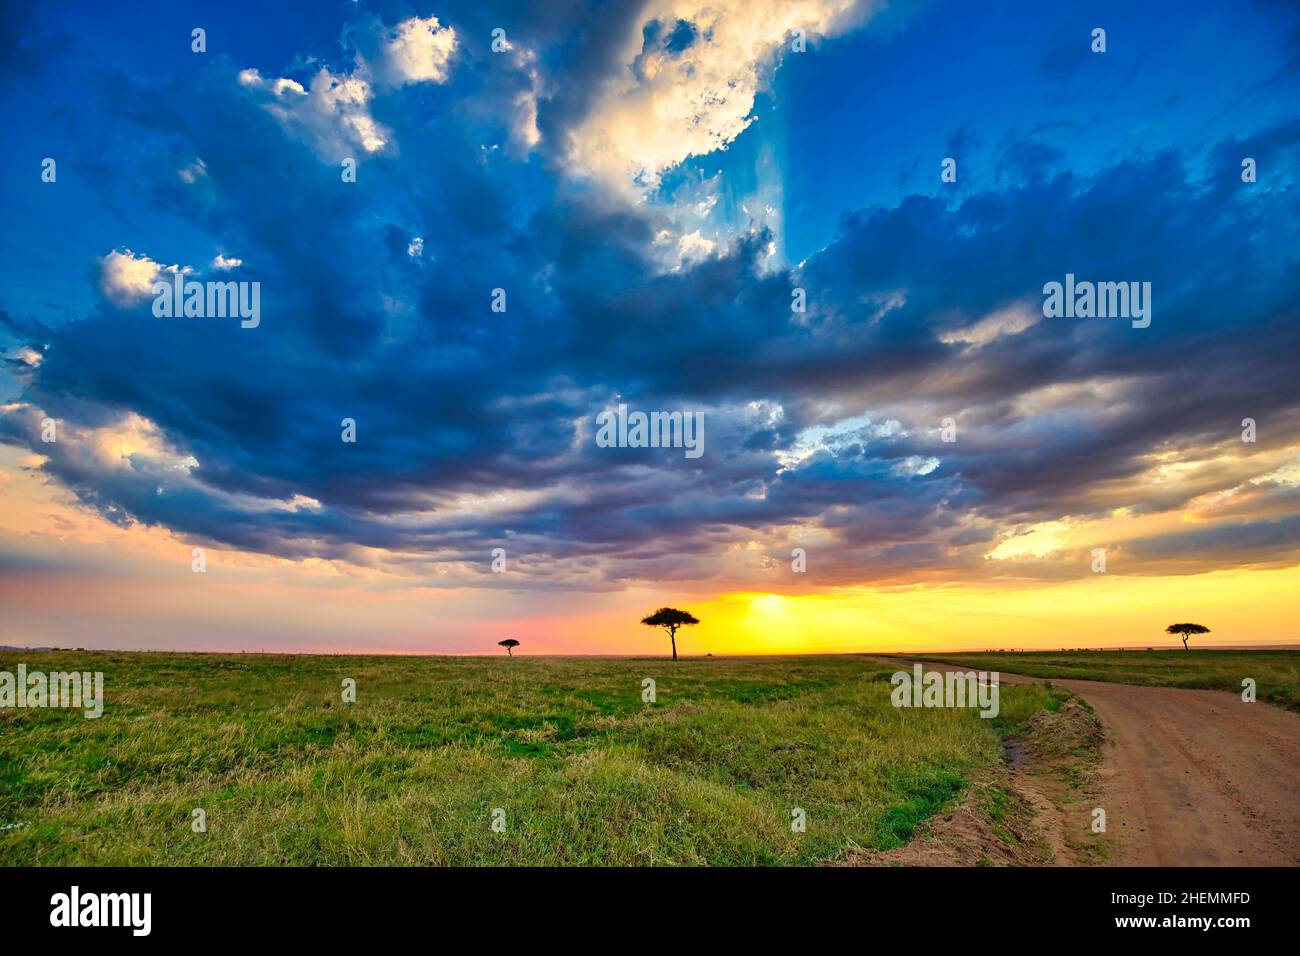 Landscape in the Maasai Mara National Reserve at late afternoon. Stock Photo